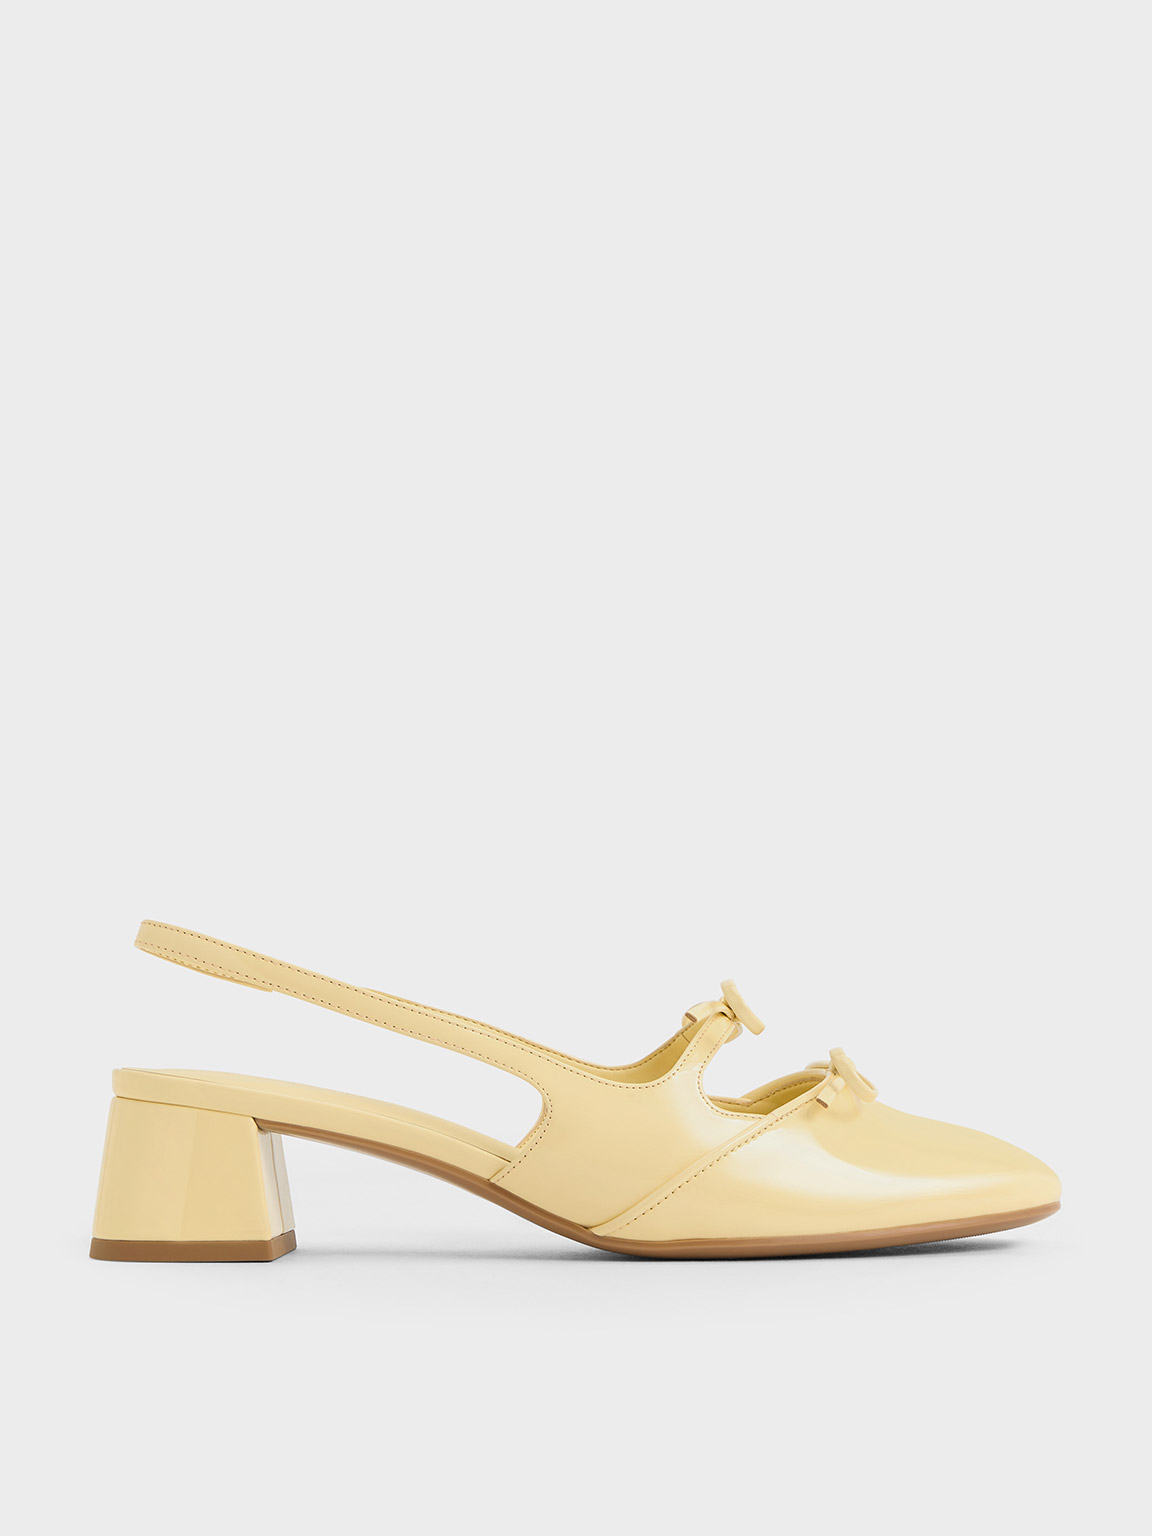 Charles & Keith Dorri Double-bow Slingback Pumps In Butter